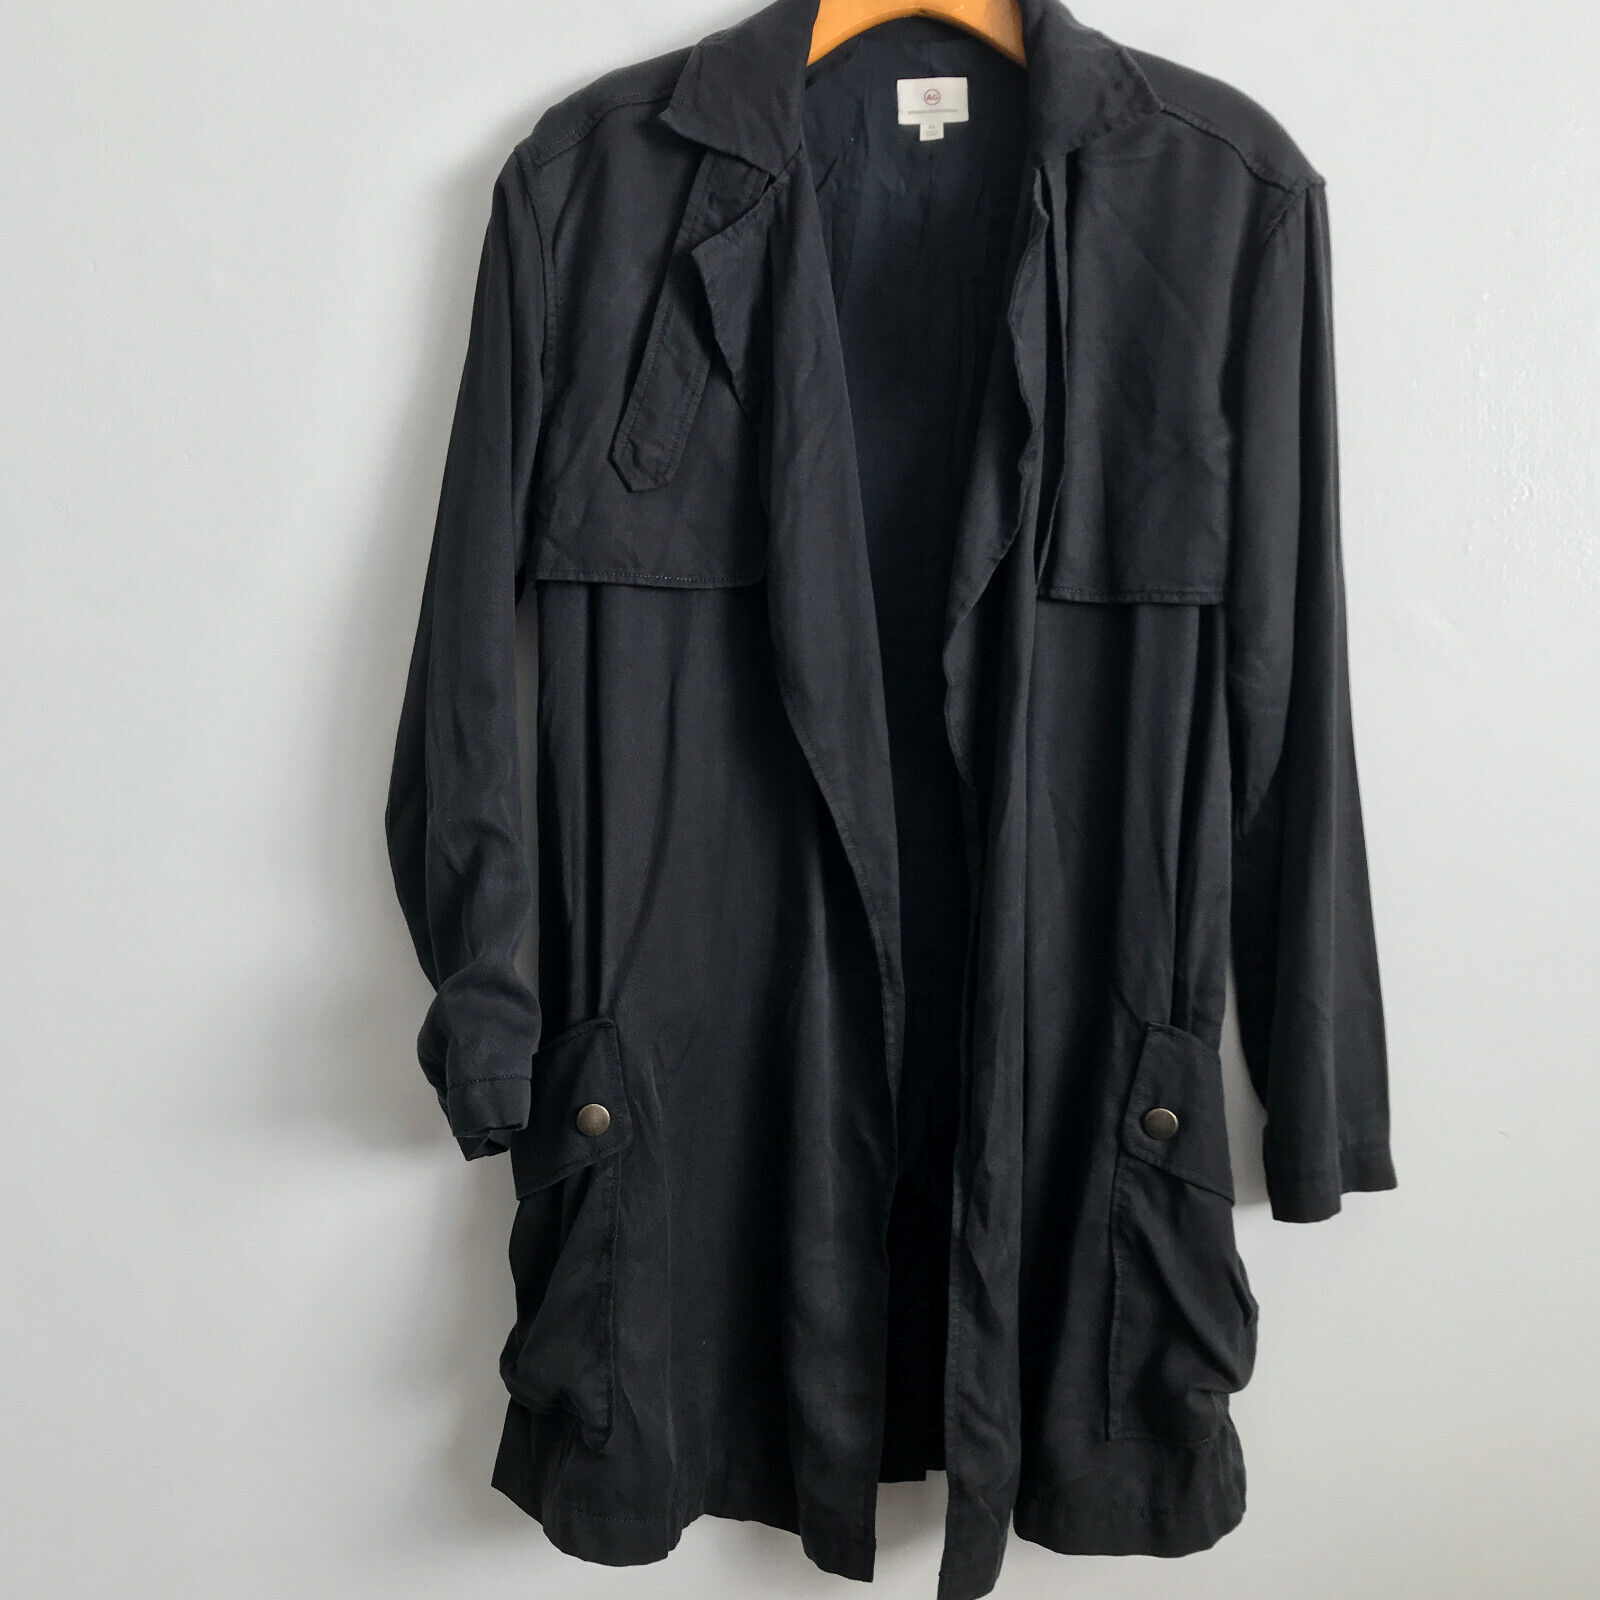 Primary image for AG Adriano Goldschmeid  Jacket XS Black Women Duster Slouchy Steam Punk Trench